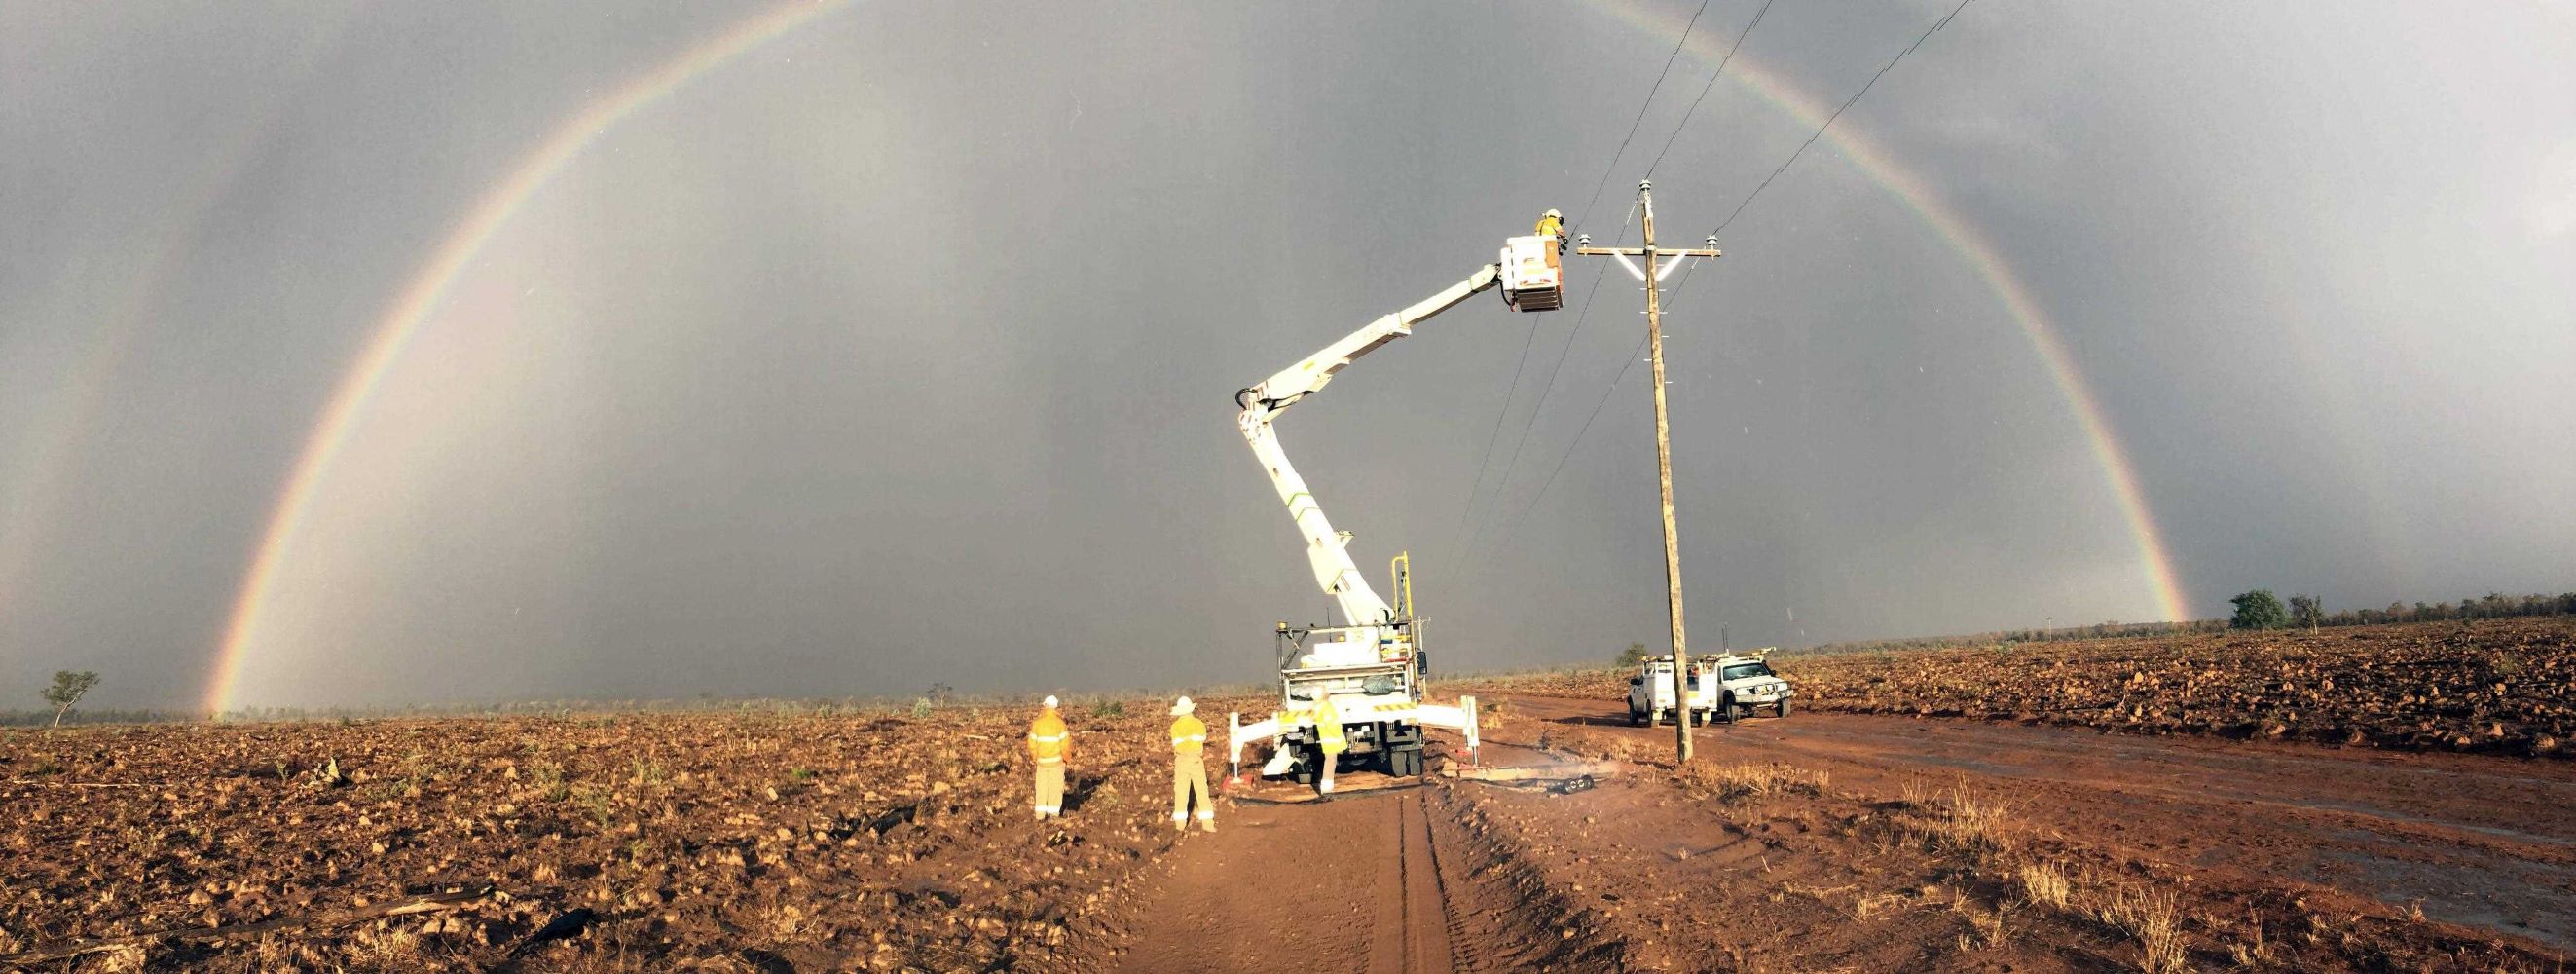 Crews restoring power in a field with a rainbow in the background